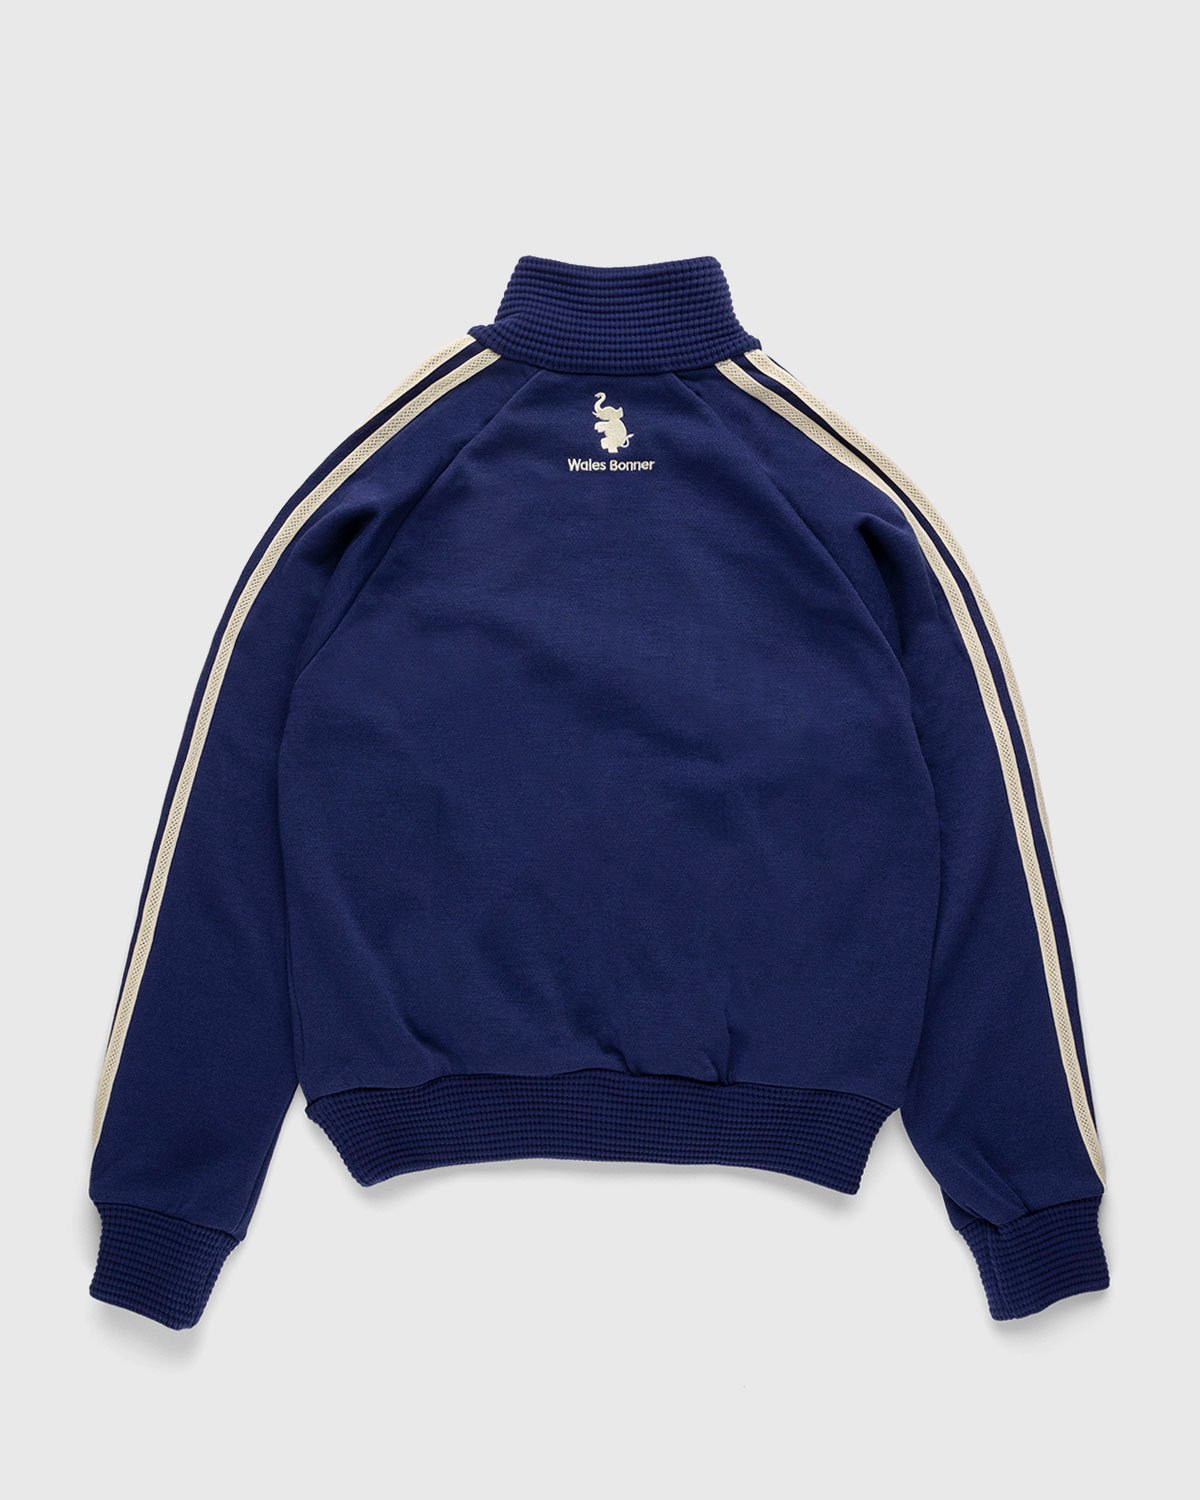 Adidas x Wales Bonner - 80s Track Top Night Sky - Clothing - Blue - Image 2